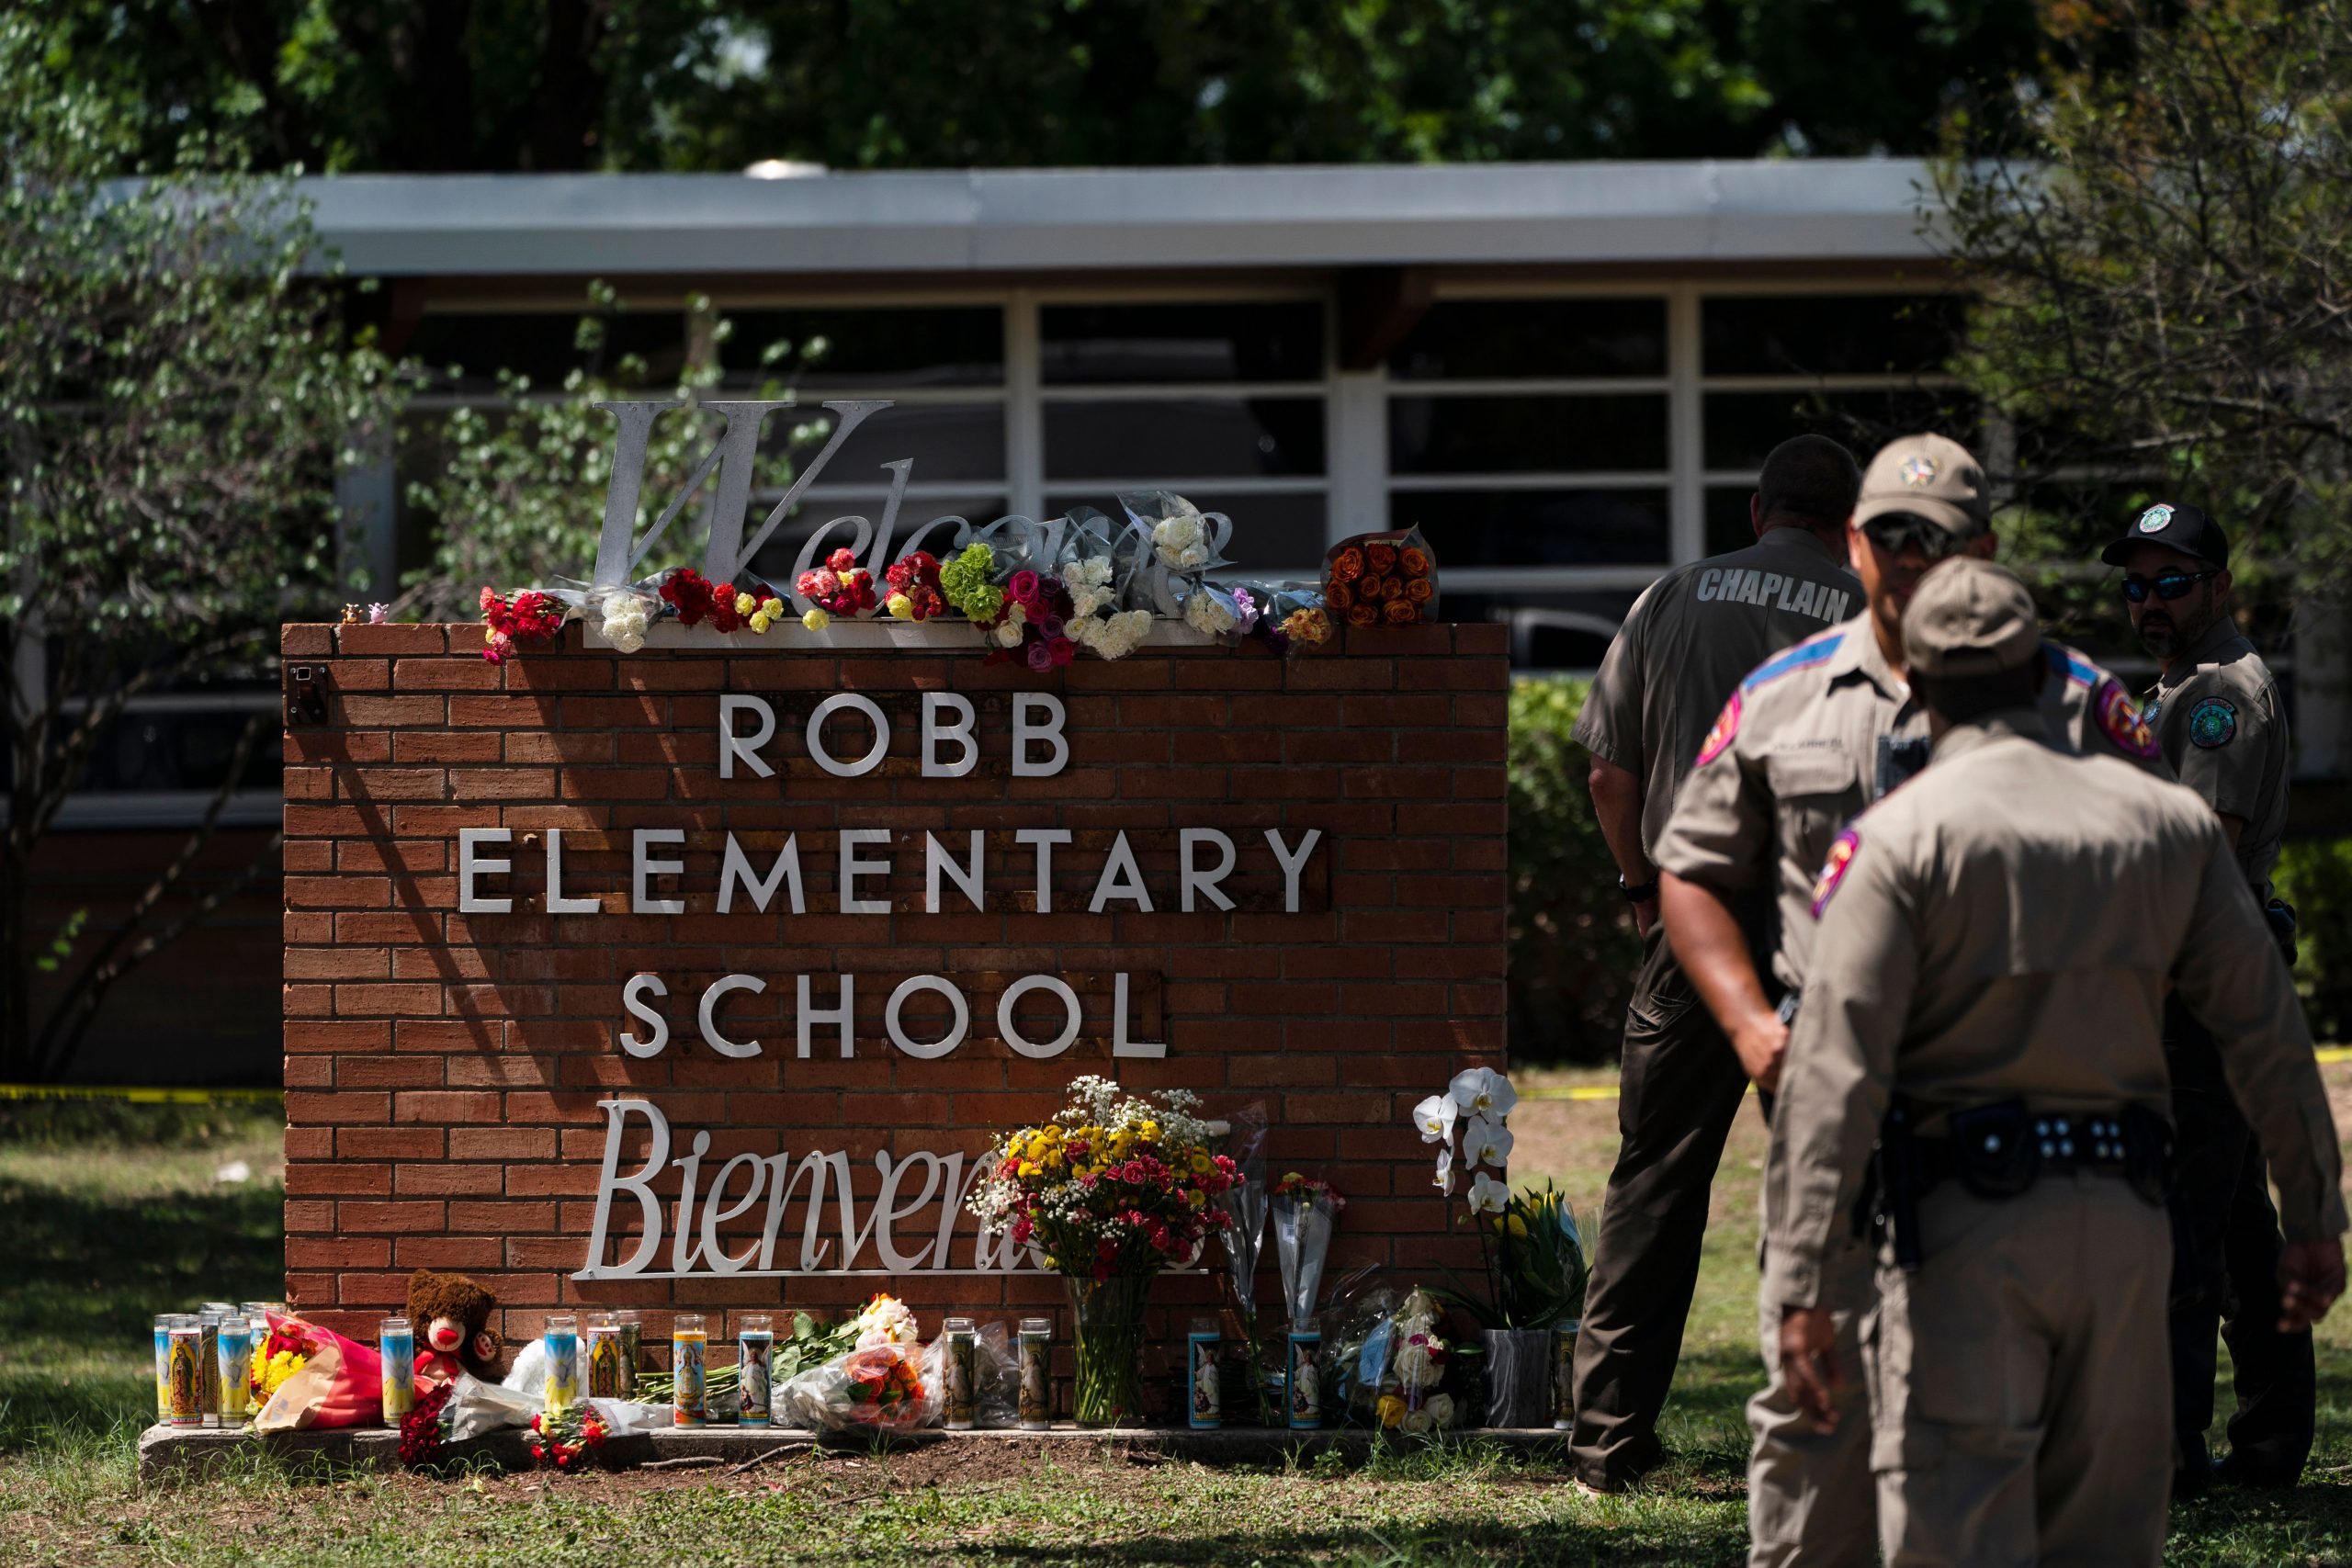 Timeline of how alleged Texas school shooter purchased his guns, ammunition